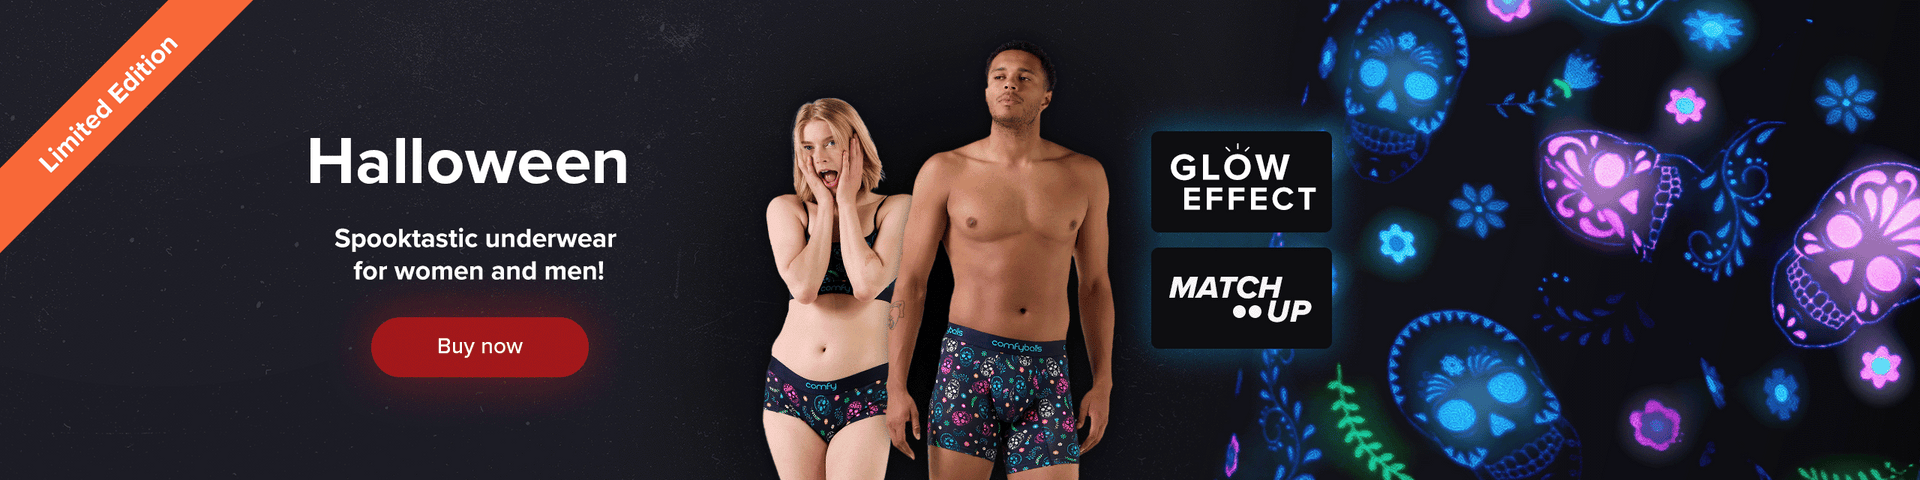 Halloween celebrated in matching Comfyballs boxers and underwear for women and men.